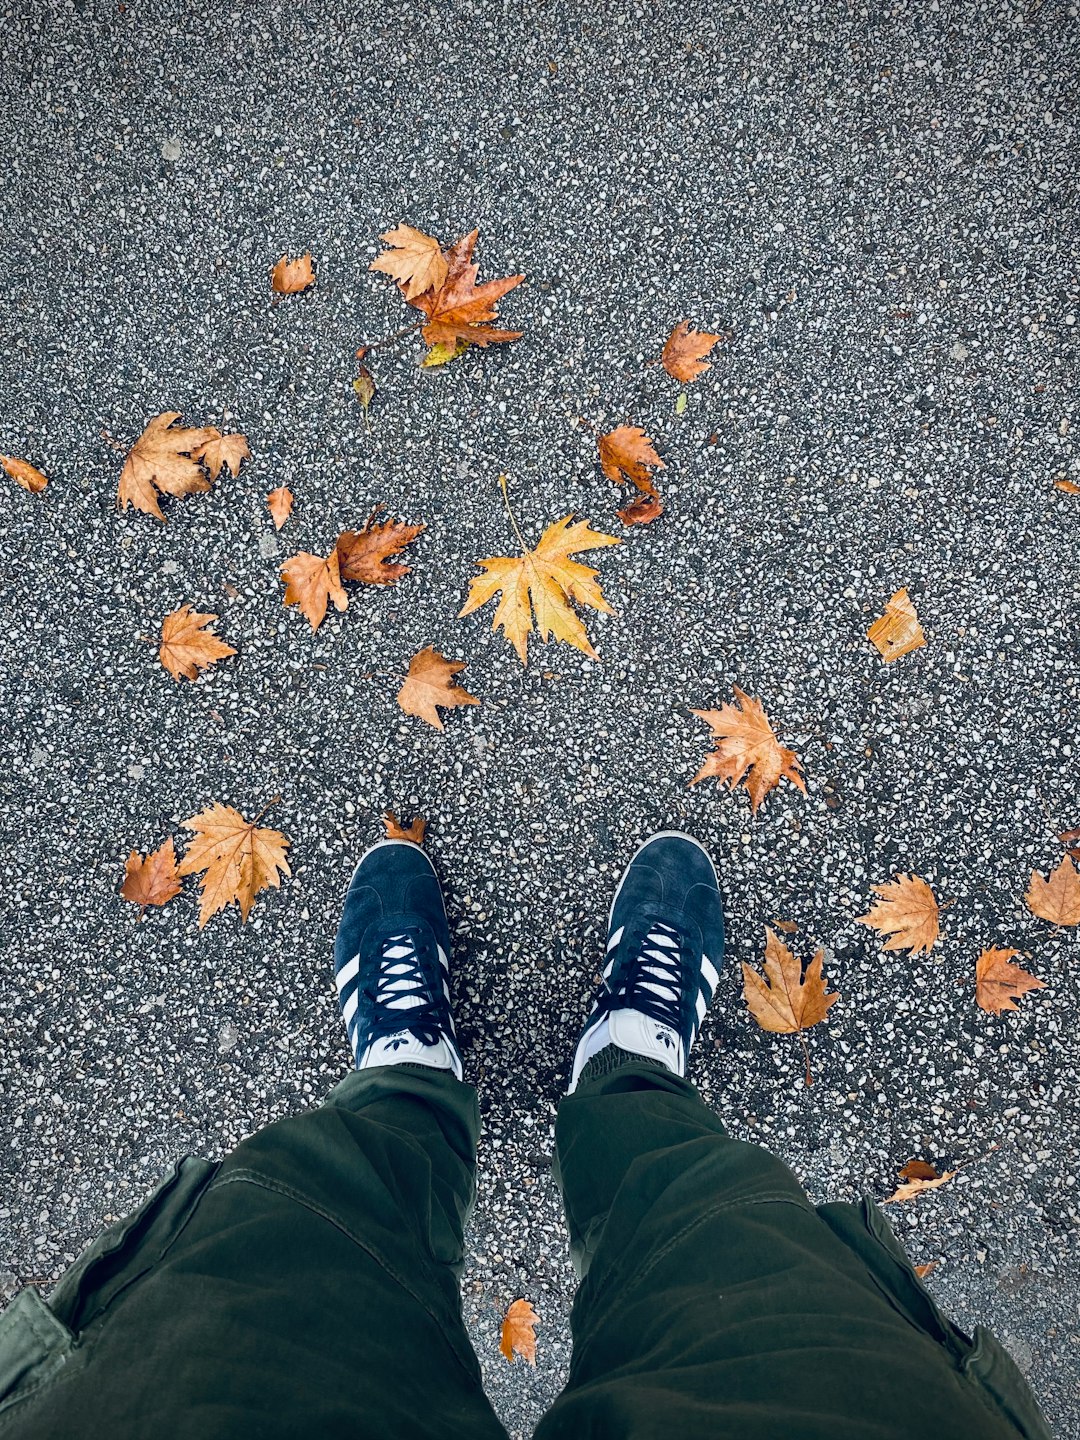 person in black pants and black and white adidas sneakers standing on dried leaves